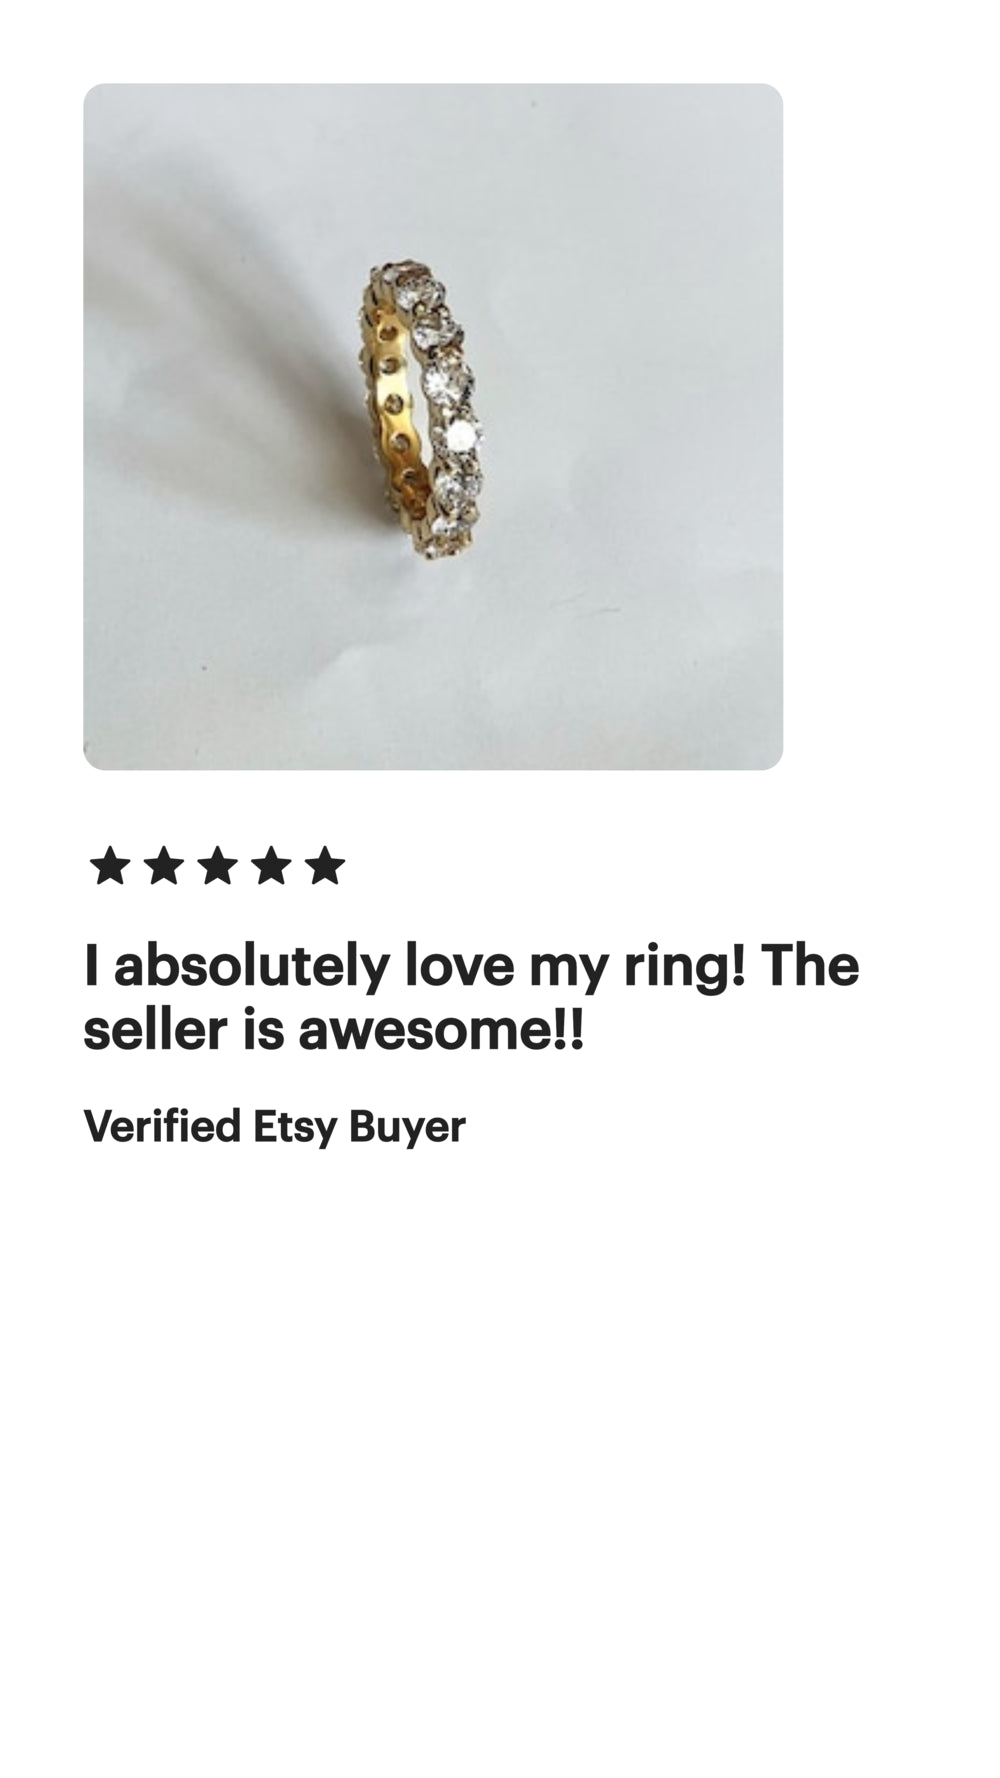 Visit Our Customer Review Page on Etsy